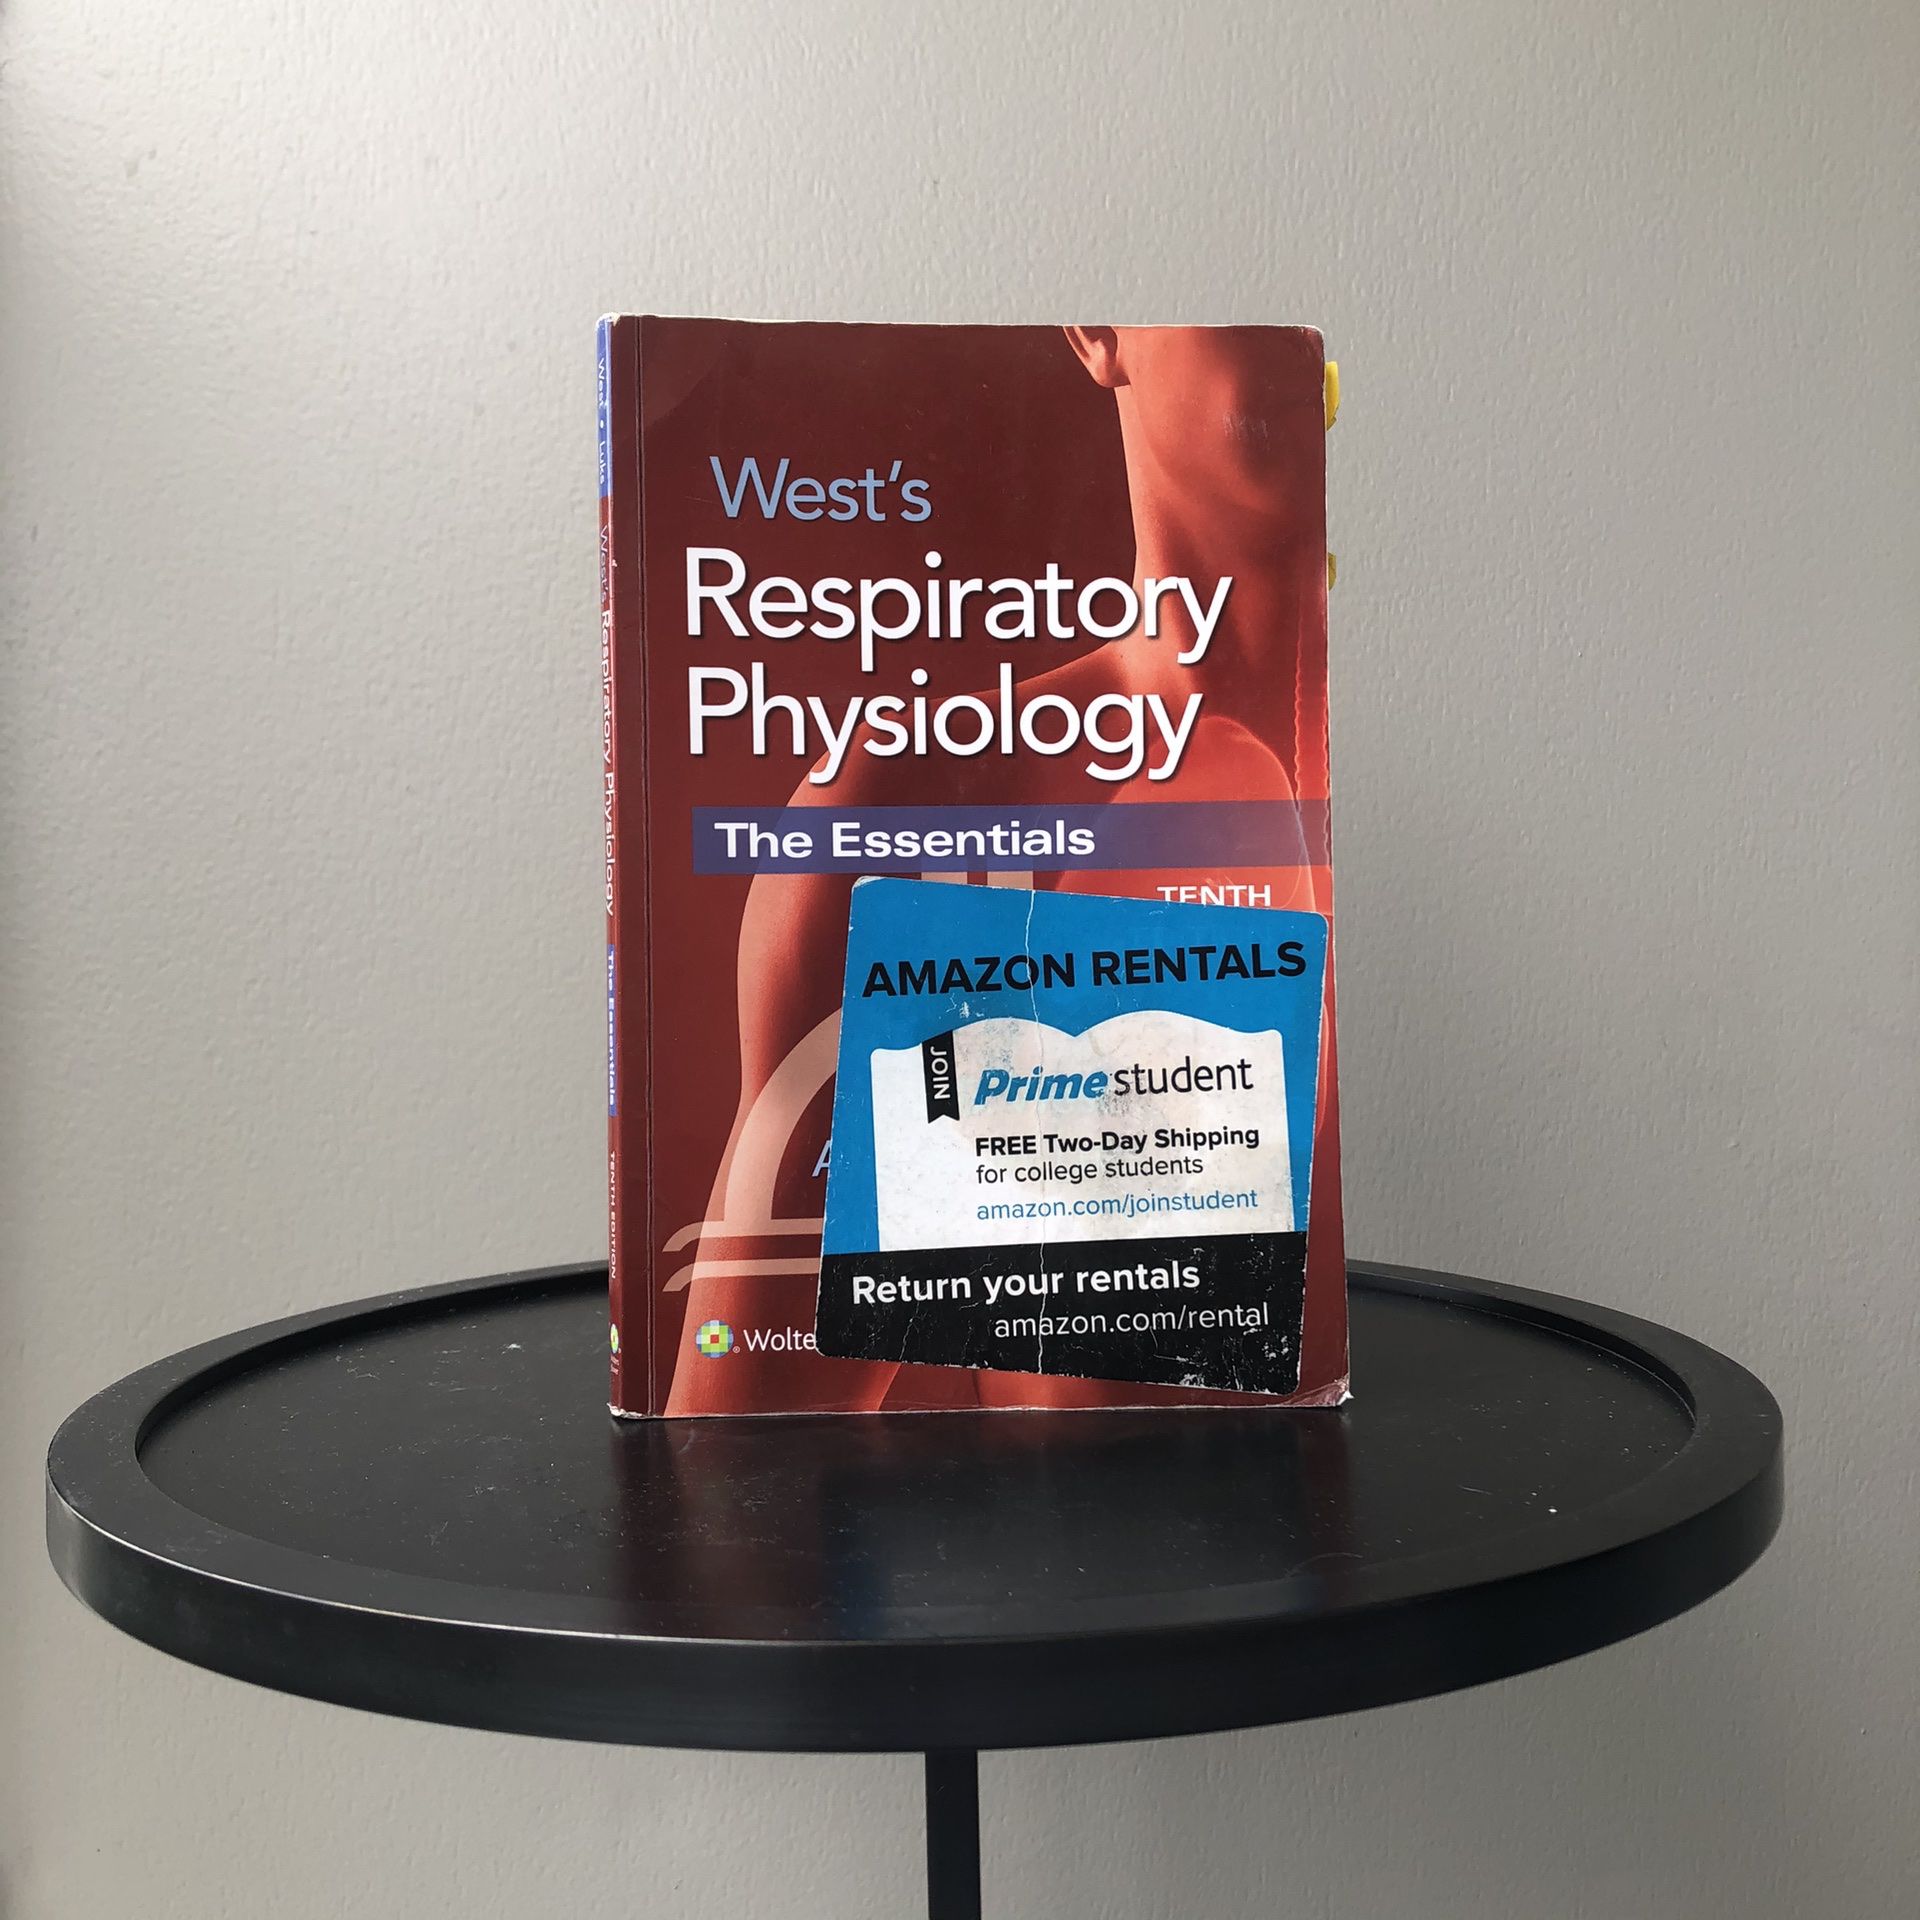 West's Respiratory Physiology Tenth Edition